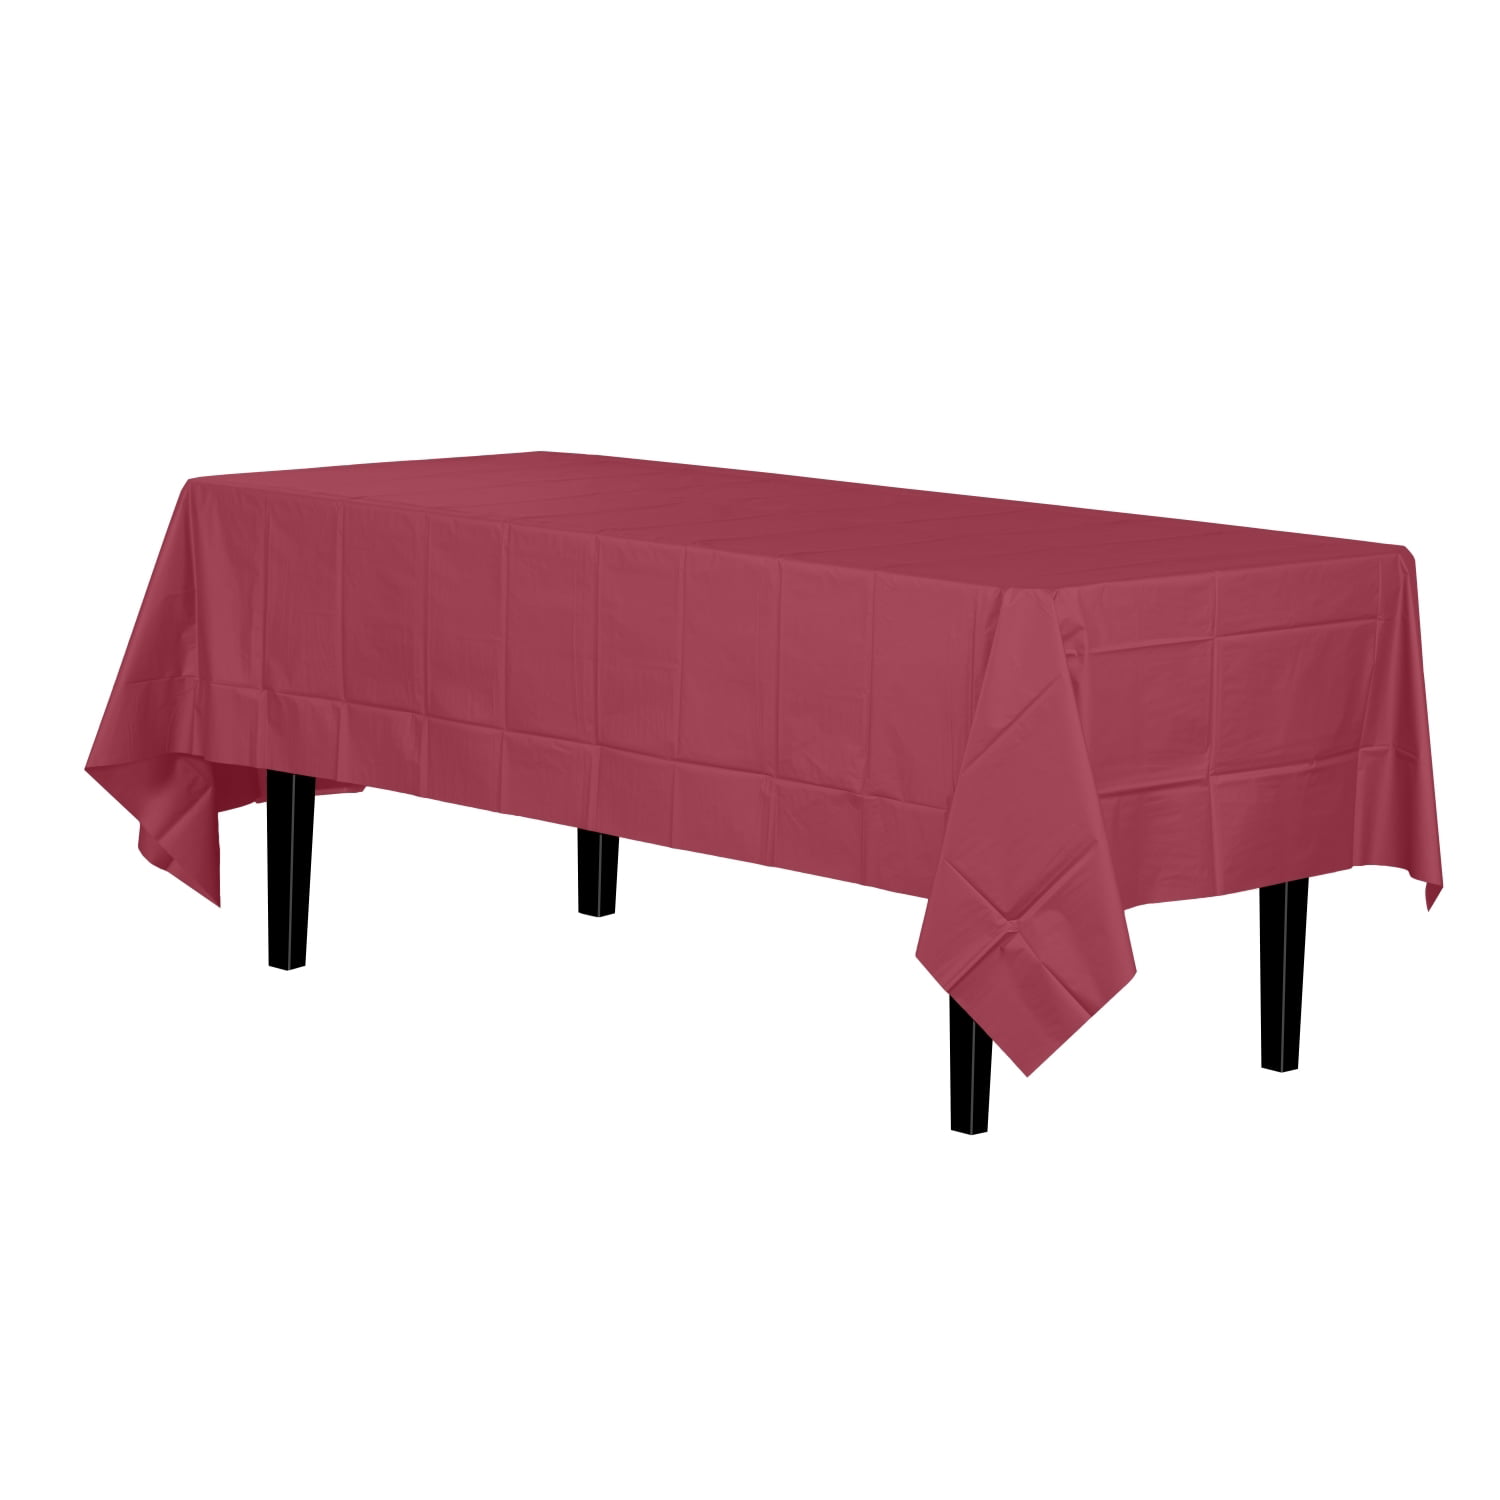 Disposable Burgundy Plastic Tablecloth Cover Heavy Duty